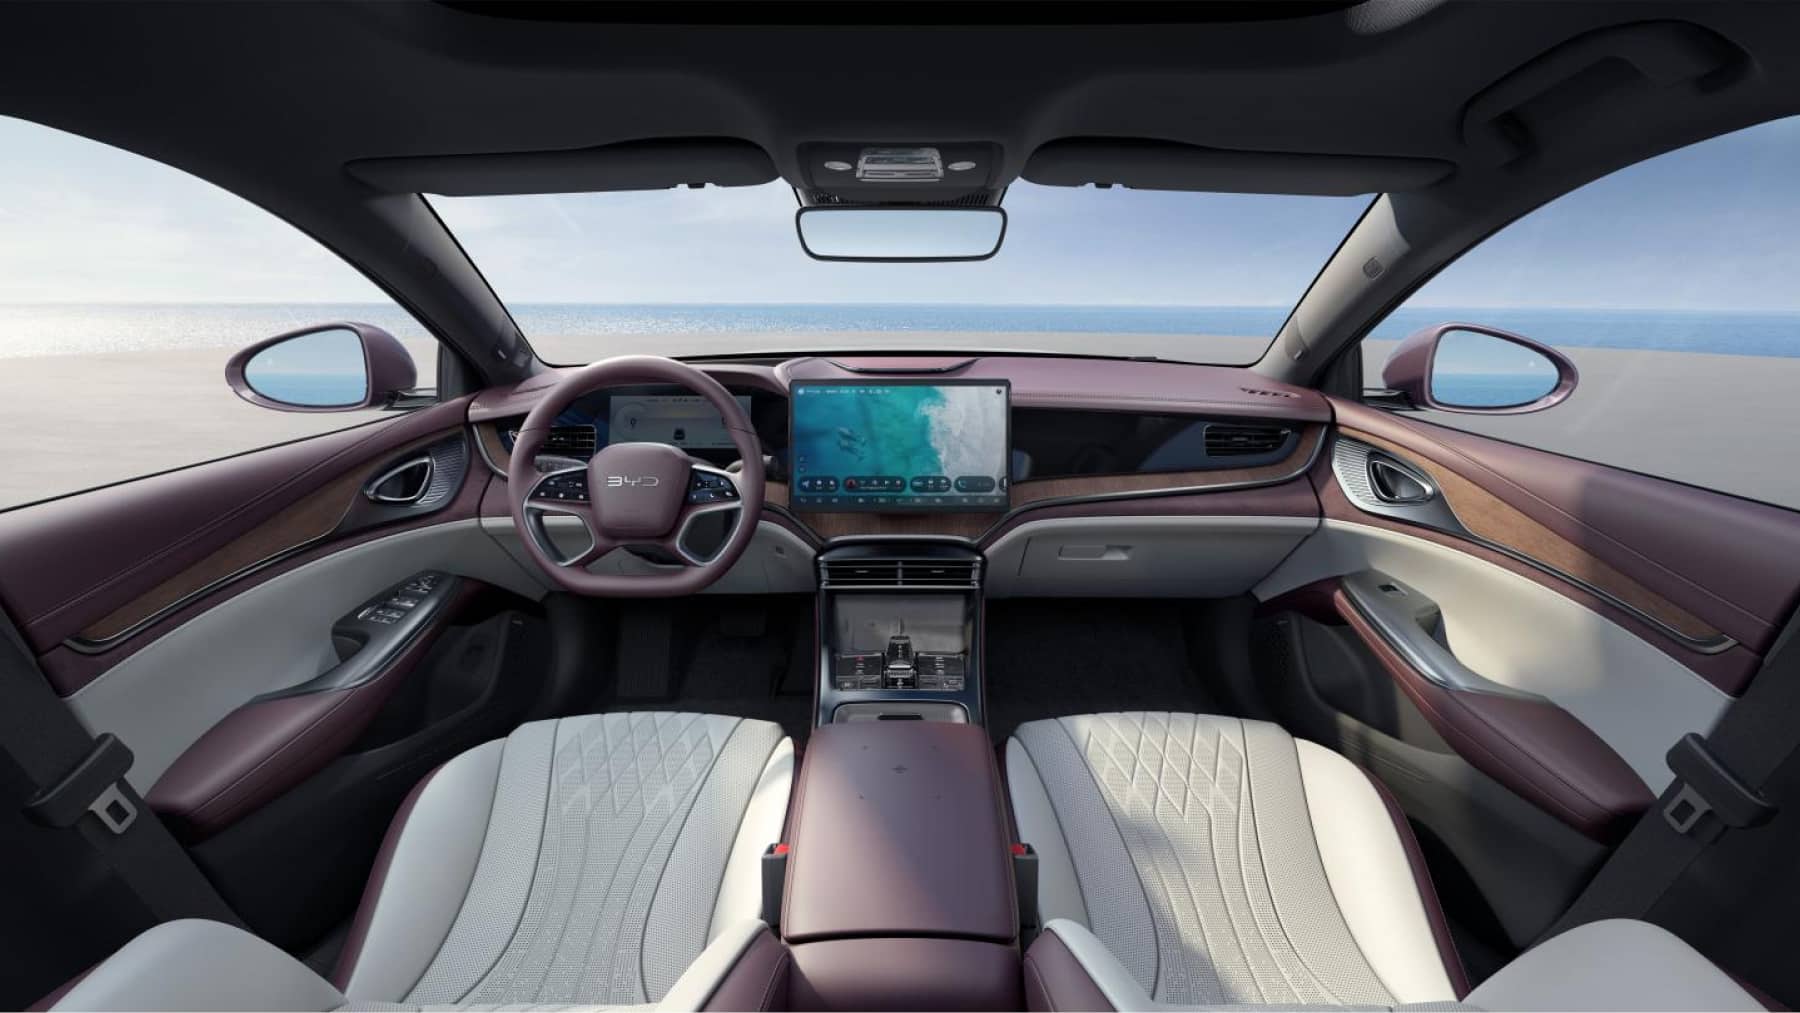 https://carnewschina.com/wp-content/uploads/2023/07/BYD-Seal-DM-i-interior-unveiled-in-China-CNC.jpg